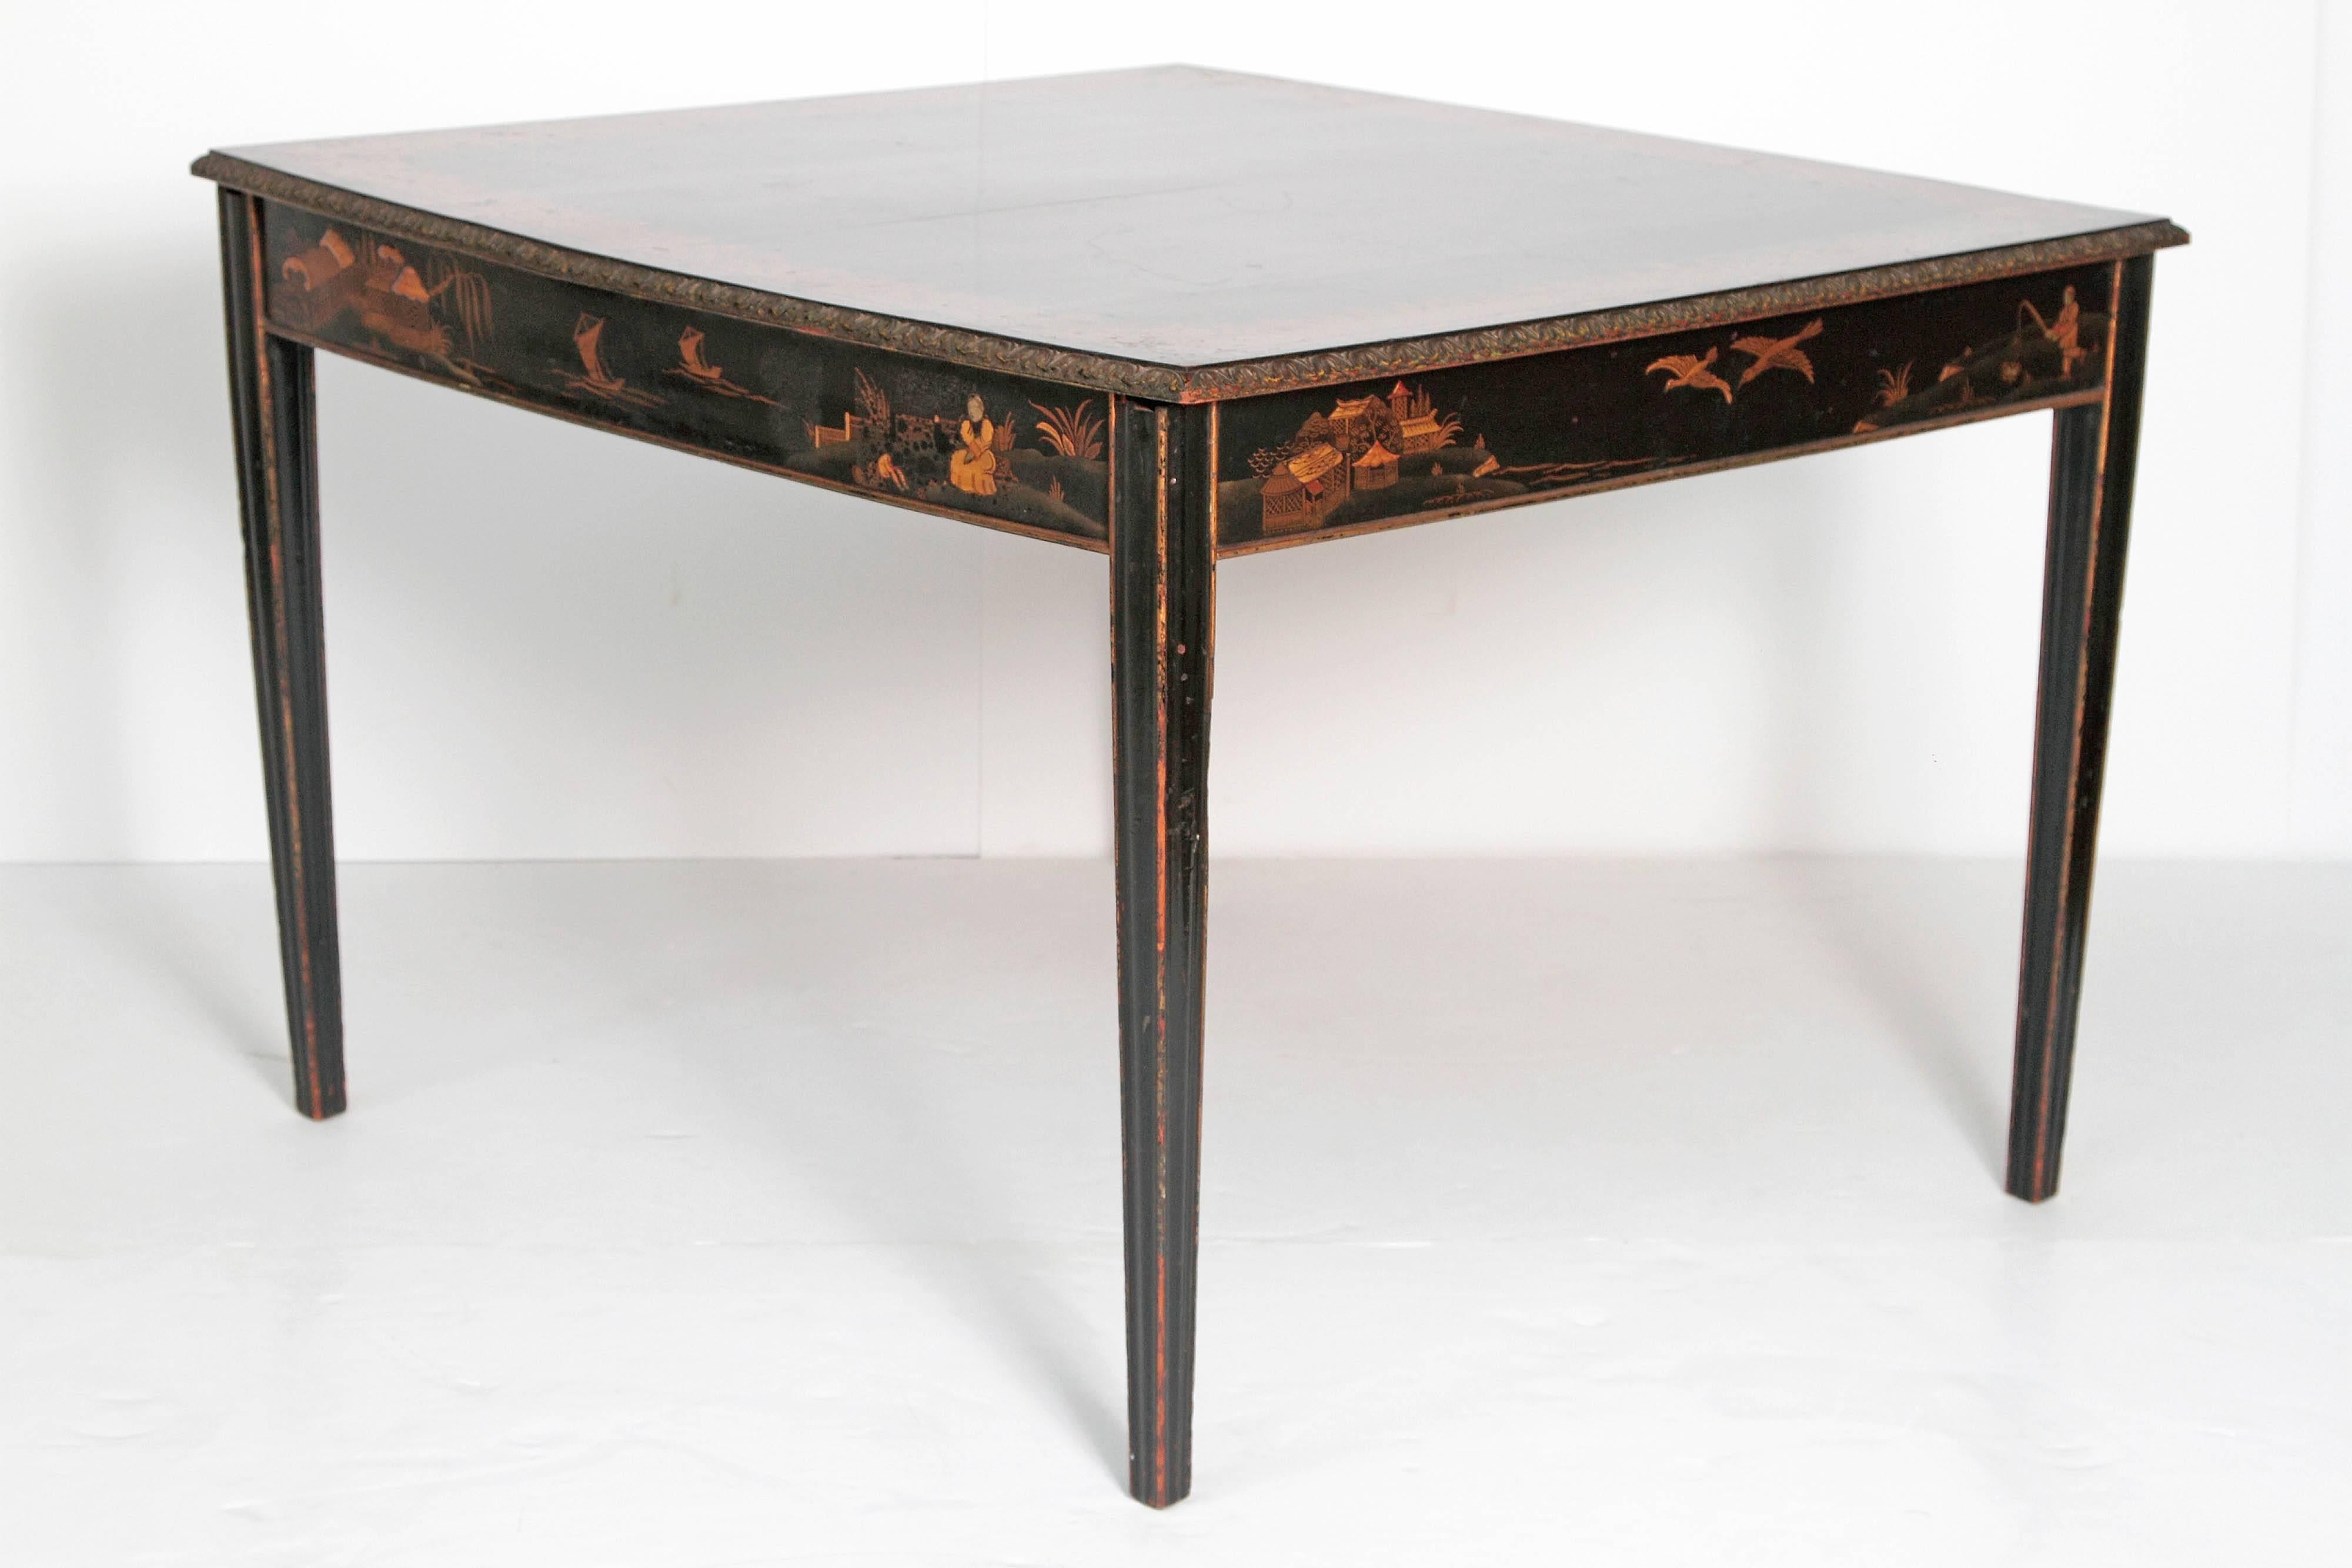 Hand-Painted 19th Century English Black Lacquer Chinoiserie Card / Games Table